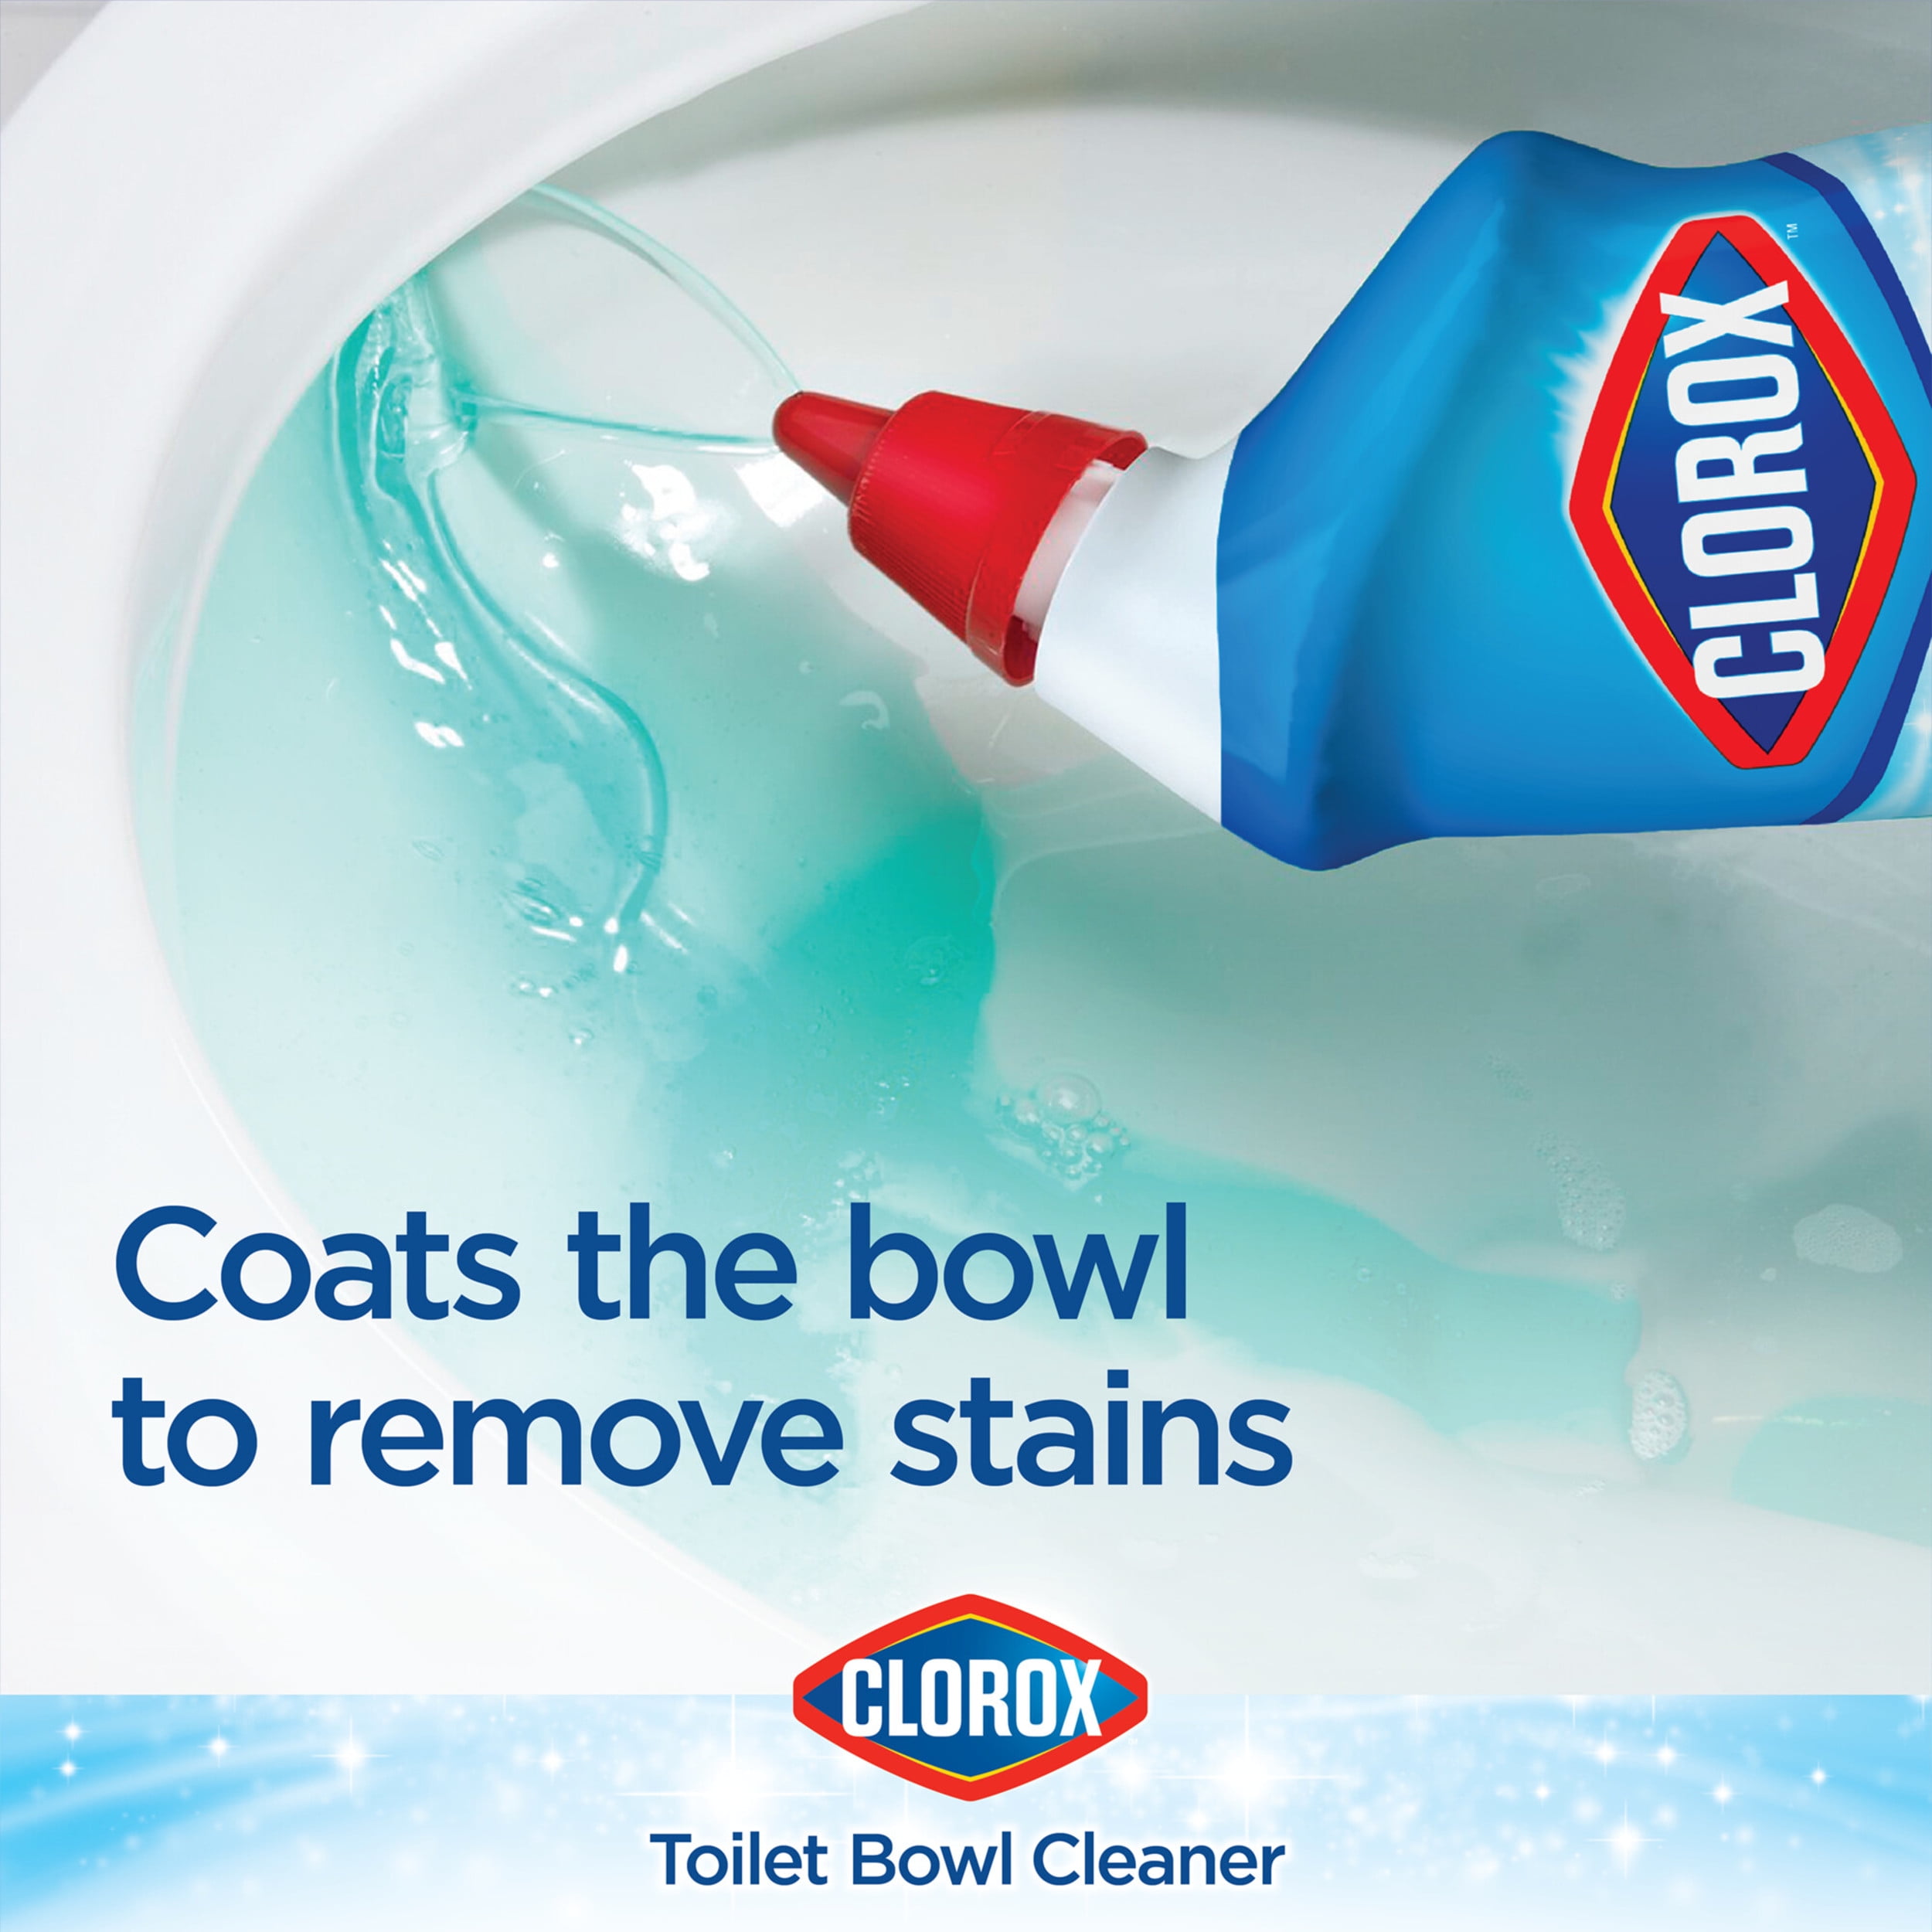 Clorox Bathroom Cleaning Supplies with Grout Cleaner, Toilet Bowl Cleaner,  & Drain Cleaner